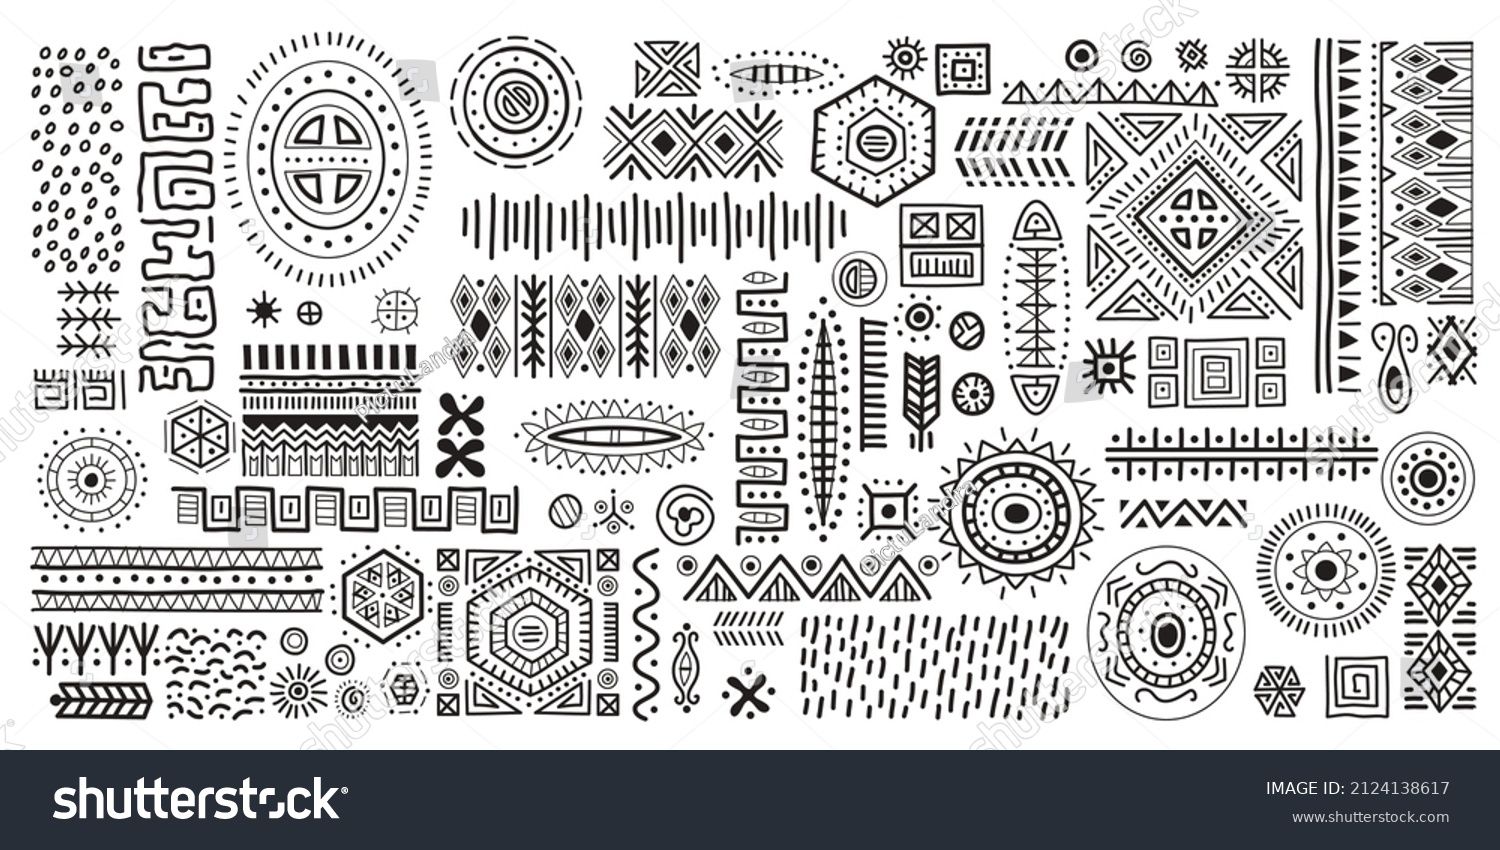 SVG of Black and white African art decoration tribal geometric shapes set. Pen and ink drawing of ancient ethnic traditional symbols and ornate signs. Hand-drawn oriental elements in doodle style. svg